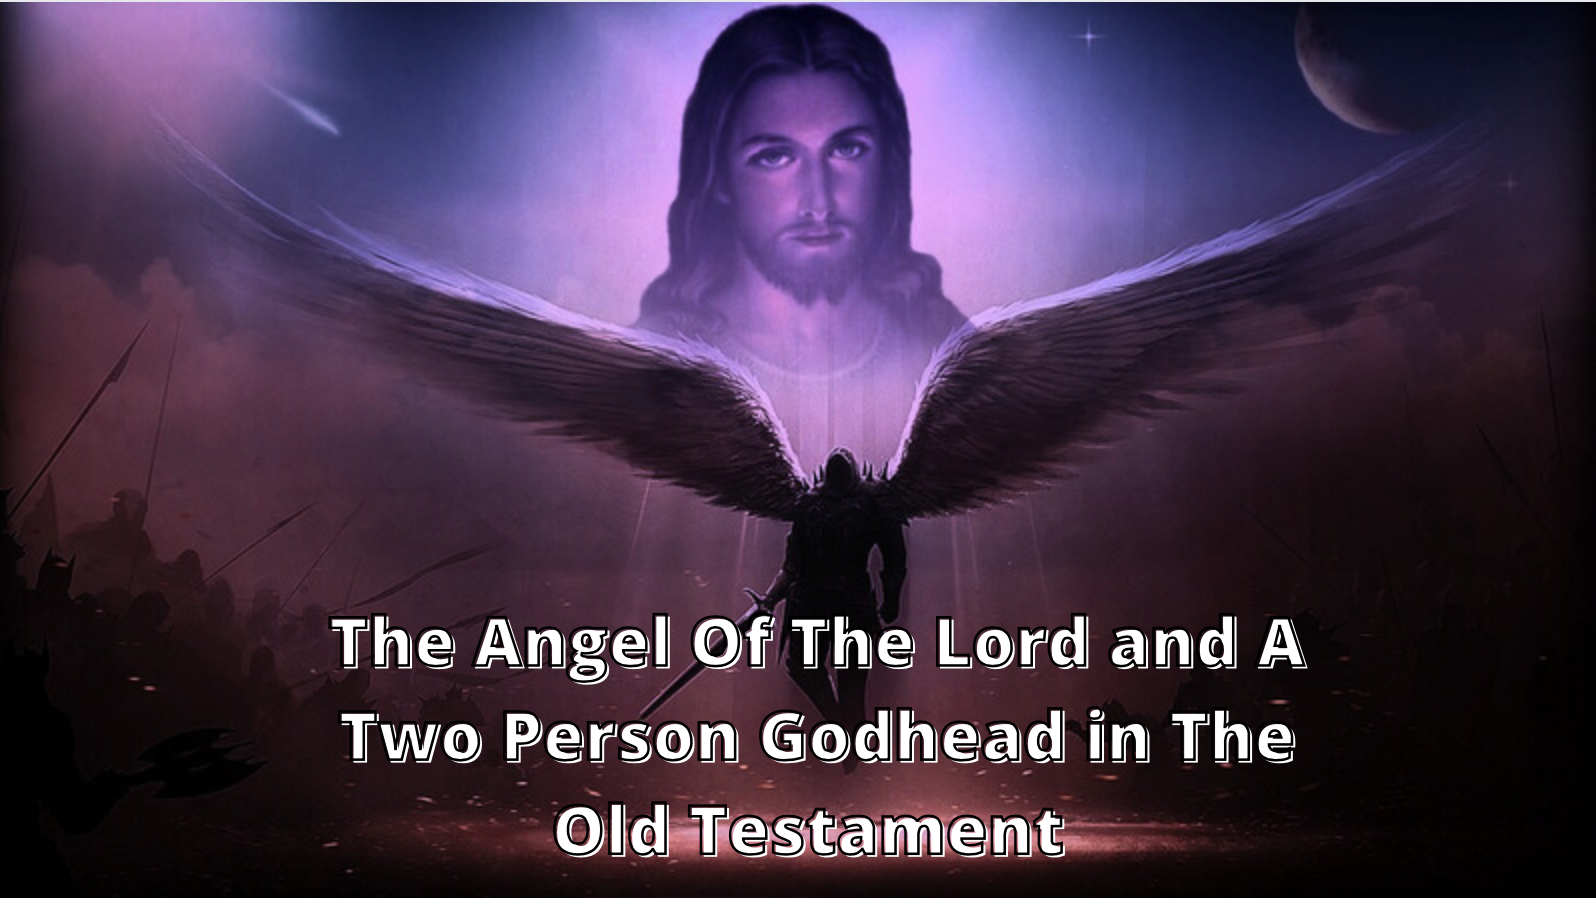 The Angel Of The Lord and A Two Person Godhead In The Old Testament